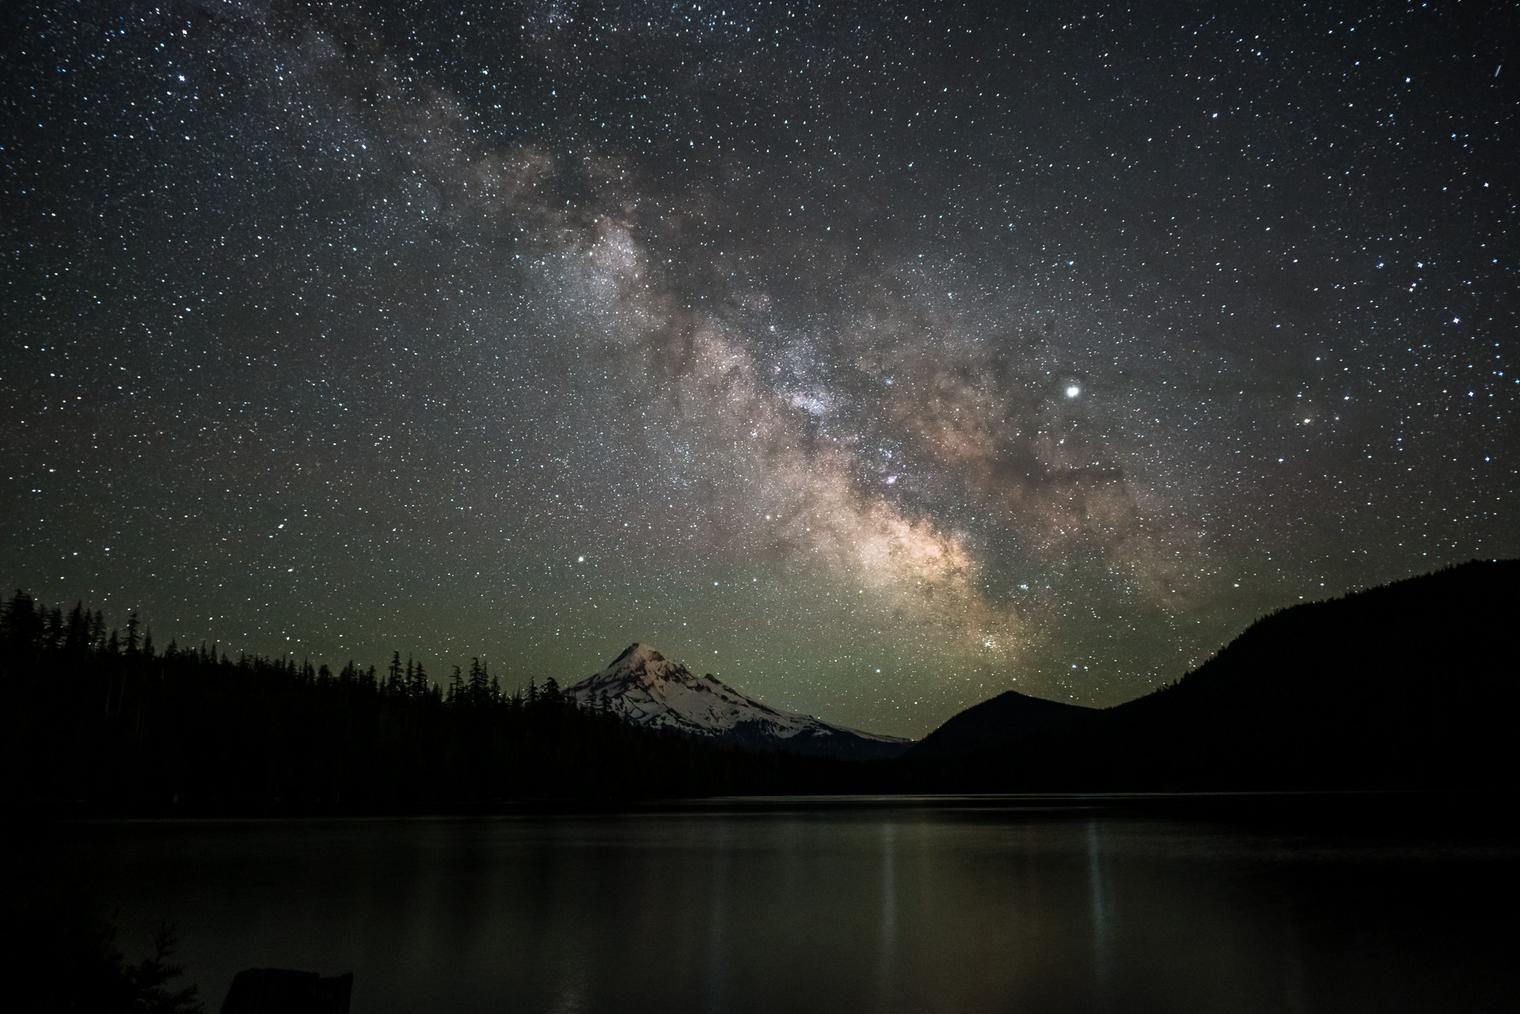 Free Lightroom Presets for Astro Photography (Milky Way and Lake)